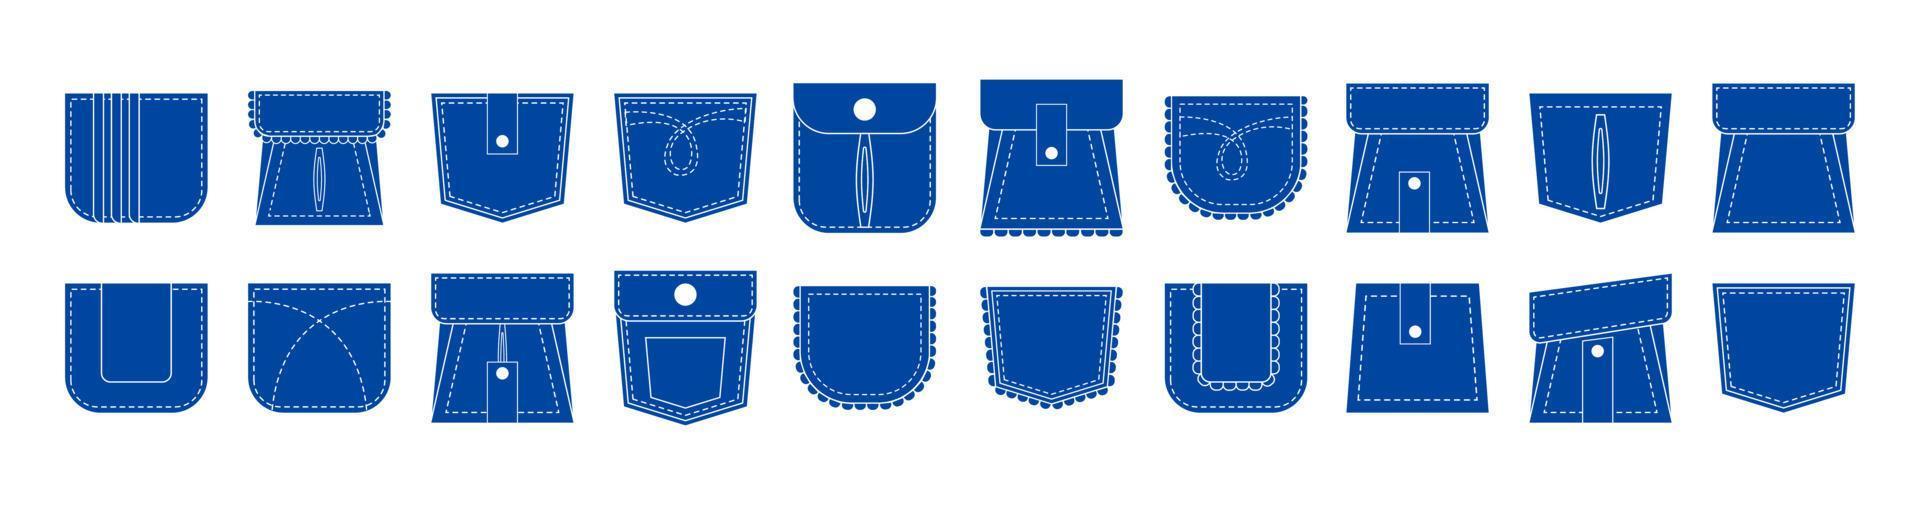 Set of blue flat patch pocket icon. White stitch symbol for tsirt, jeans, pants. Pleated sign with frill or ruffles. vector